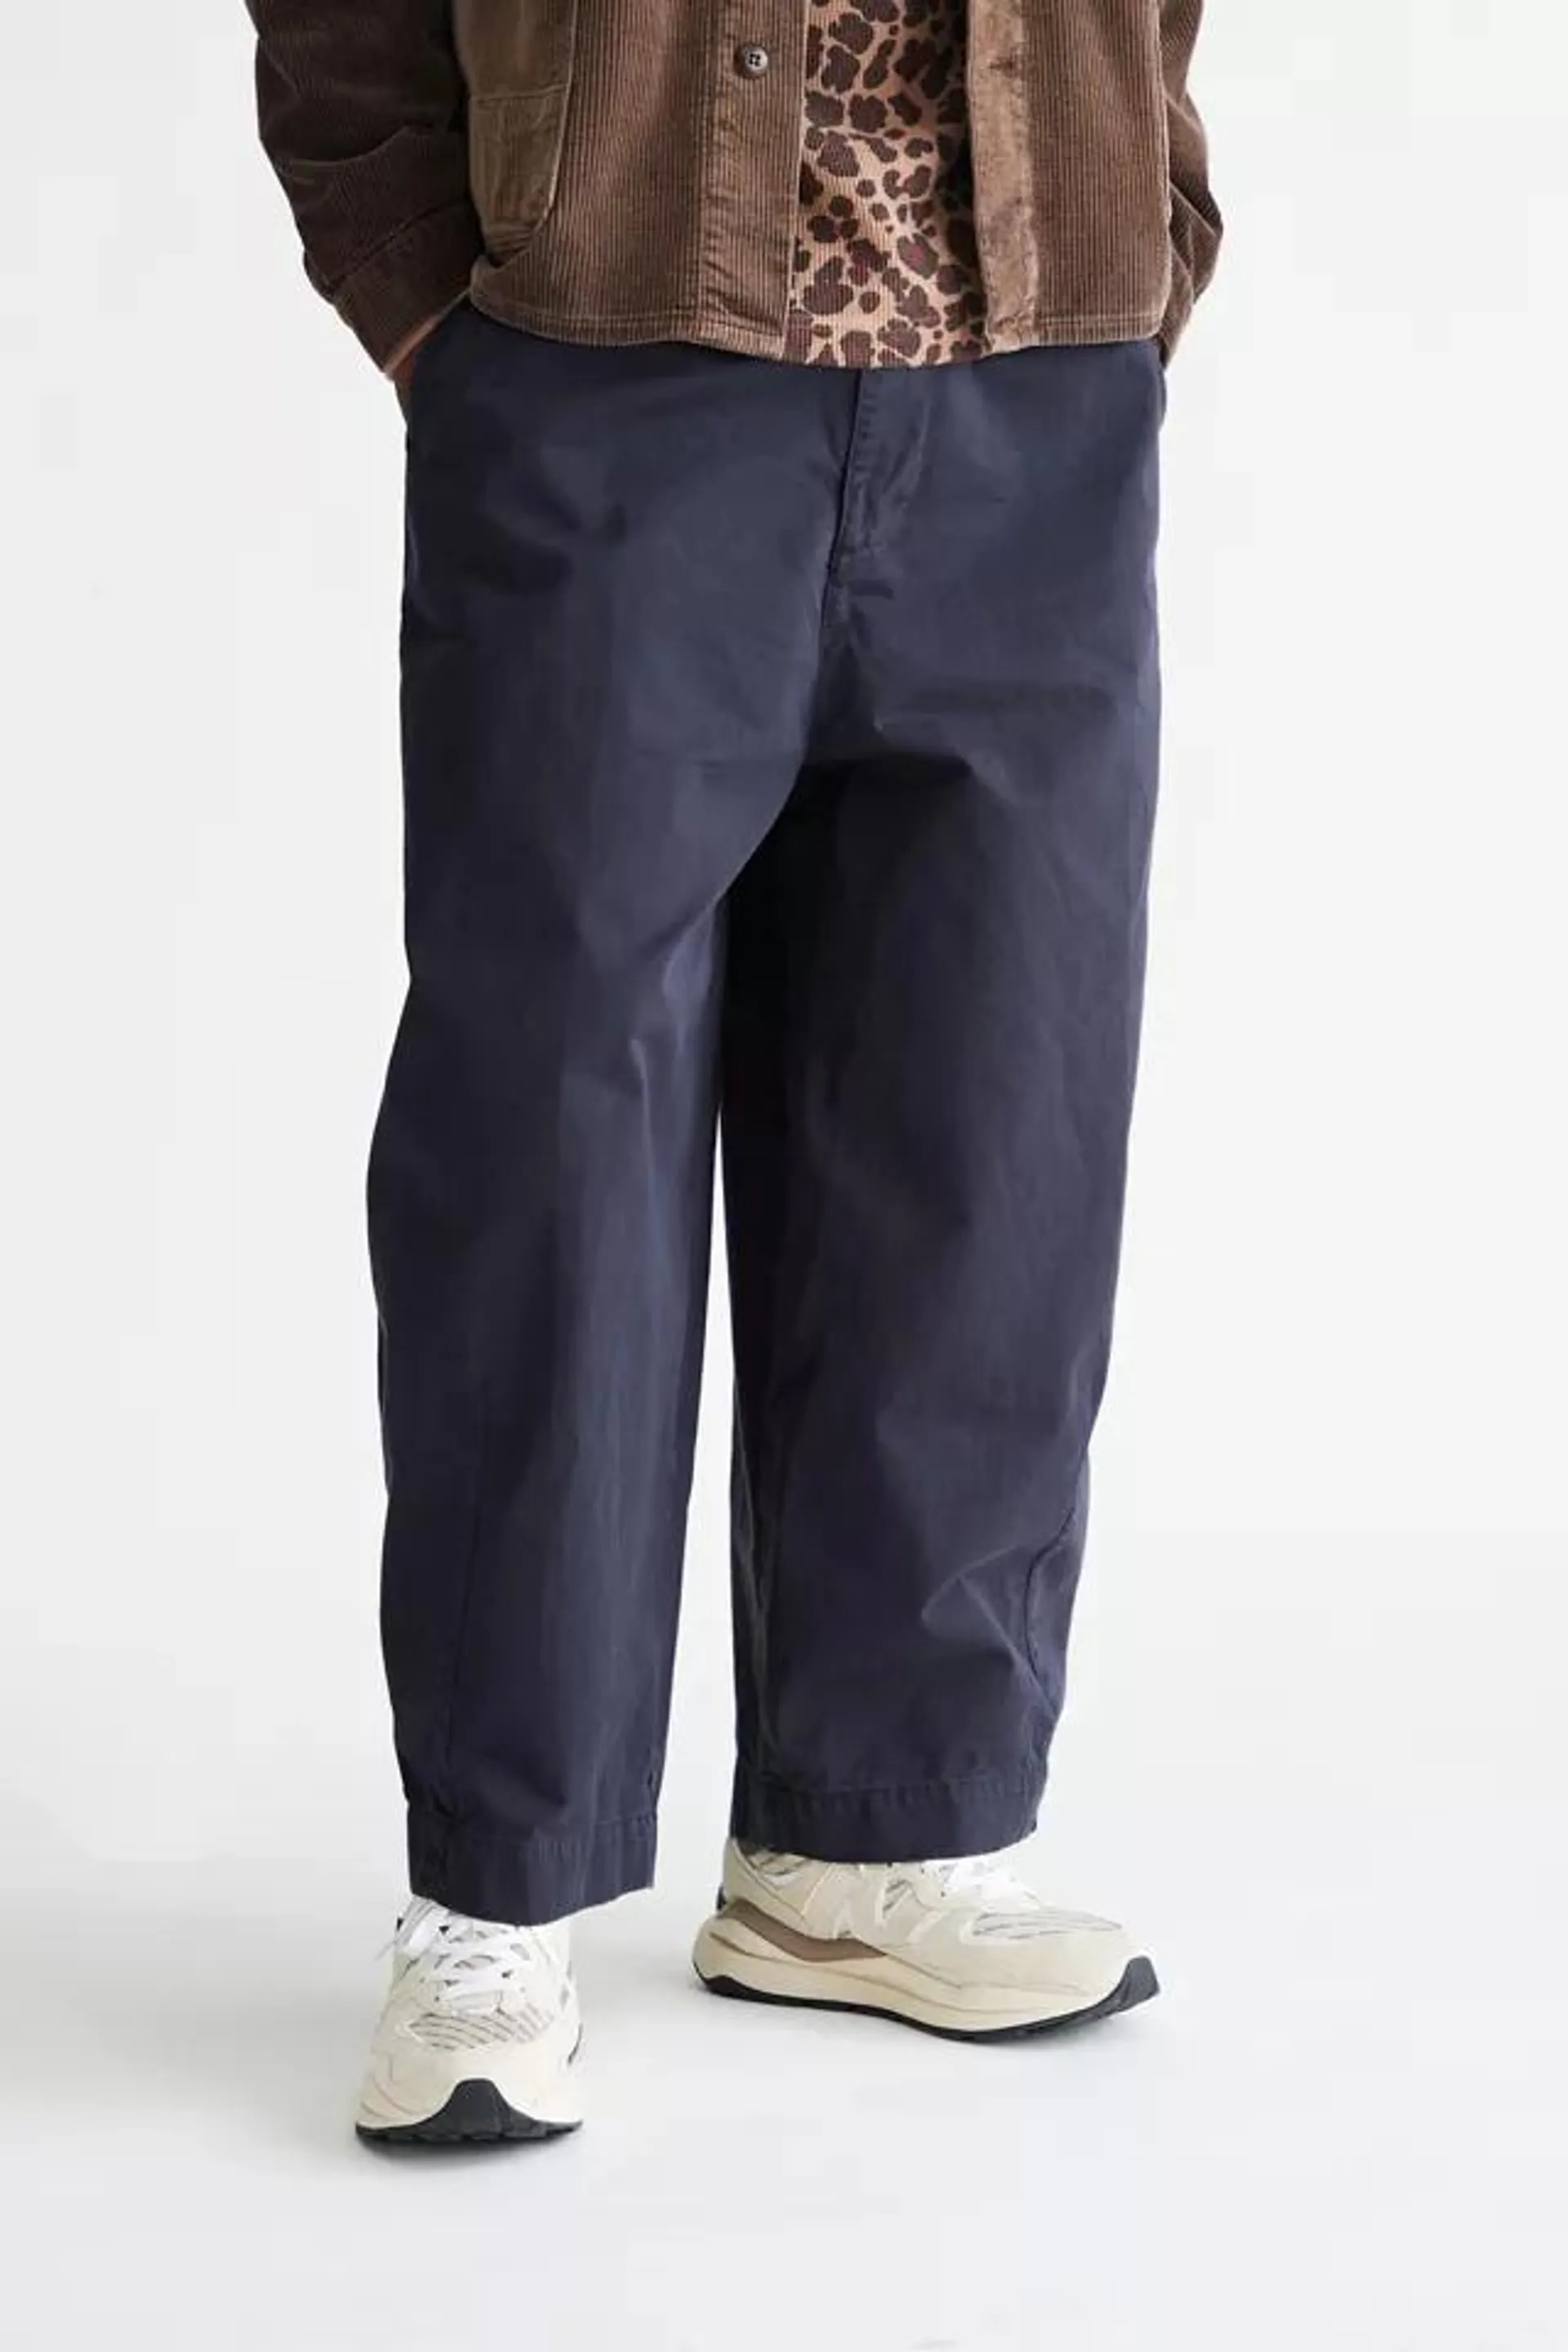 UO Twill Curved Beach Pant